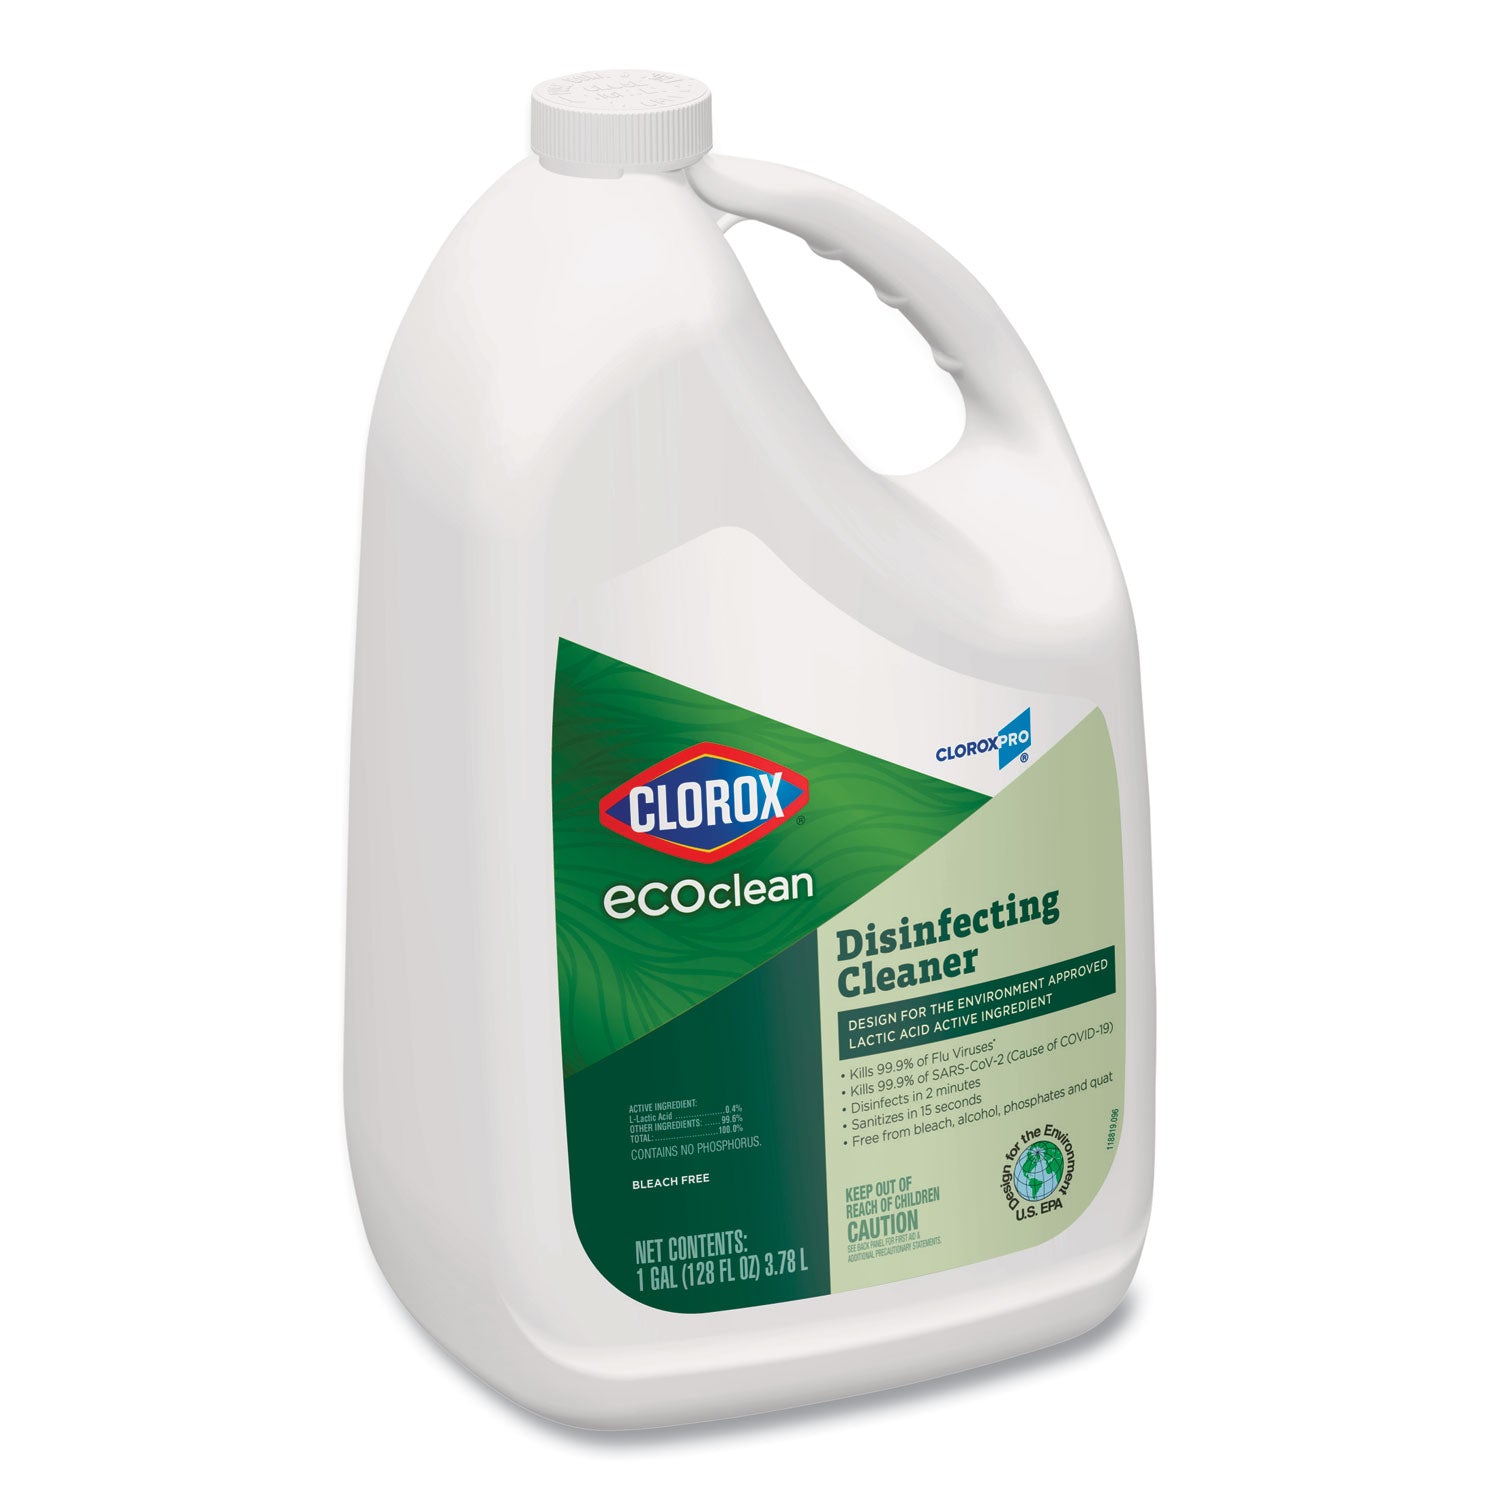 clorox-pro-ecoclean-disinfecting-cleaner-unscented-128-oz-refill-bottle-4-carton_clo60094ct - 2